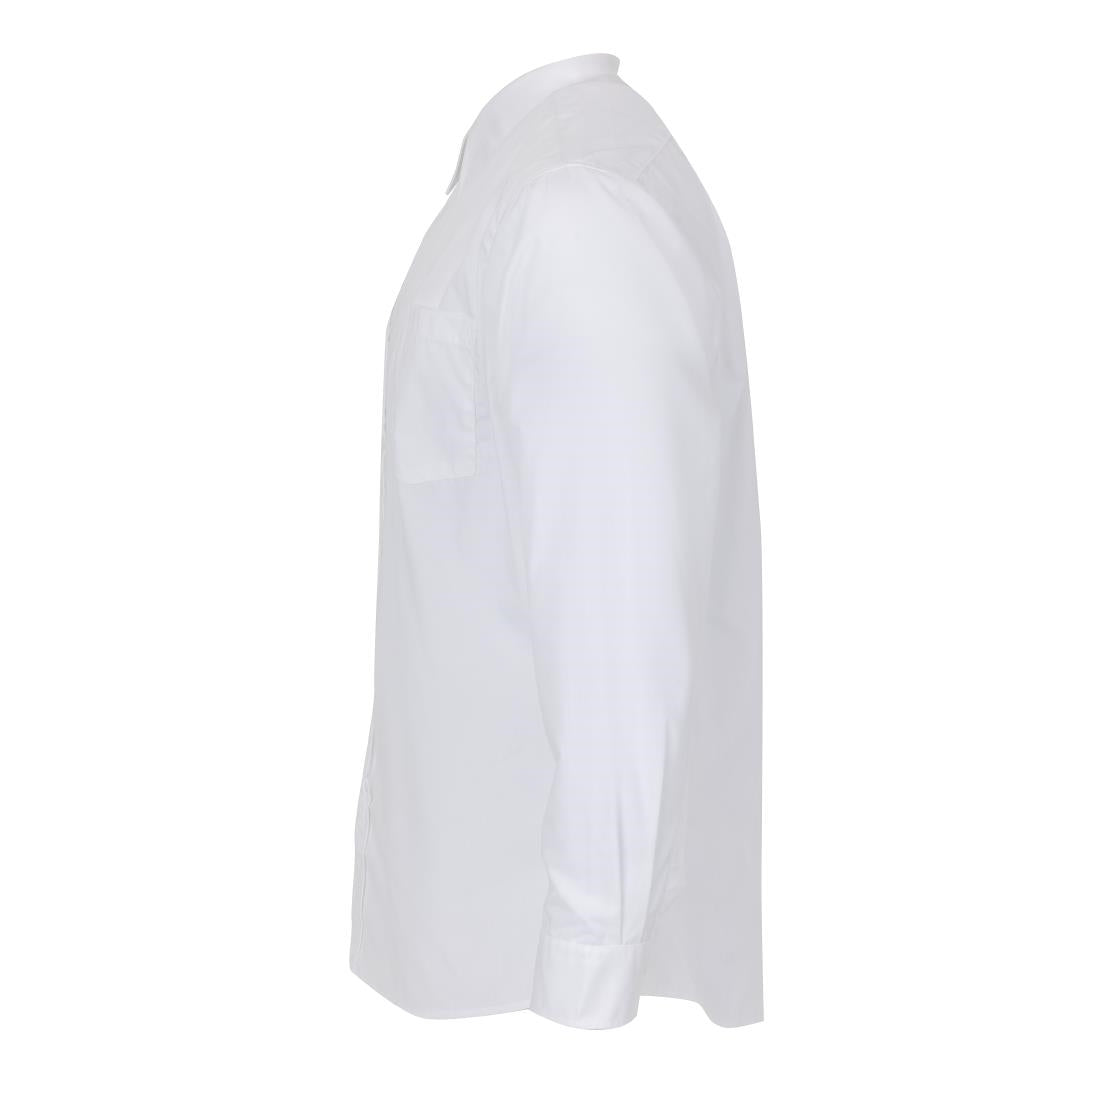 A730-S Chef Works Unisex Long Sleeve Shirt White S JD Catering Equipment Solutions Ltd